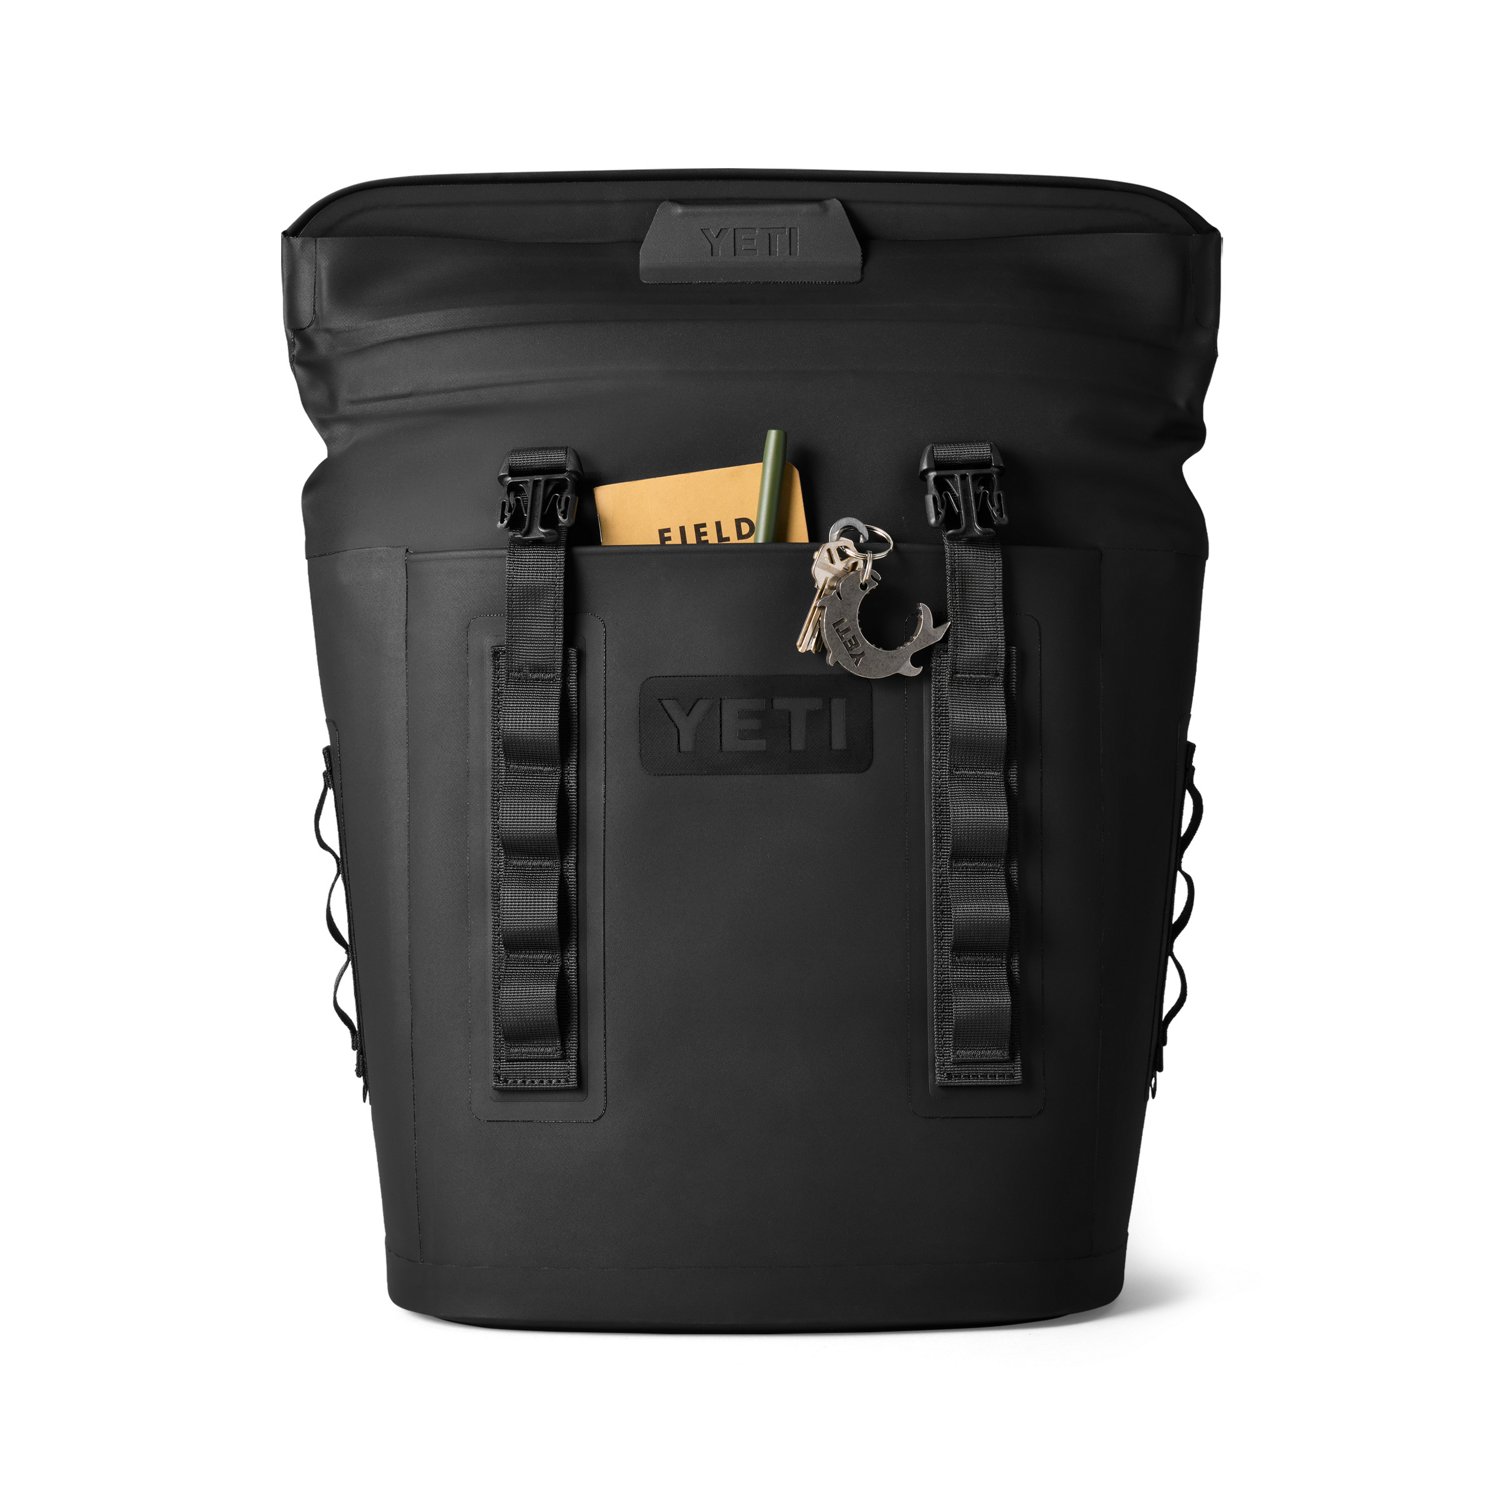 https://academy.scene7.com/is/image/academy//coolers/yeti-hopper-backpack-m12-soft-cooler-18060131336-black/5c872bde60d5483eb2f2247ee5e095c2?$pdp-mobile-gallery-ng$